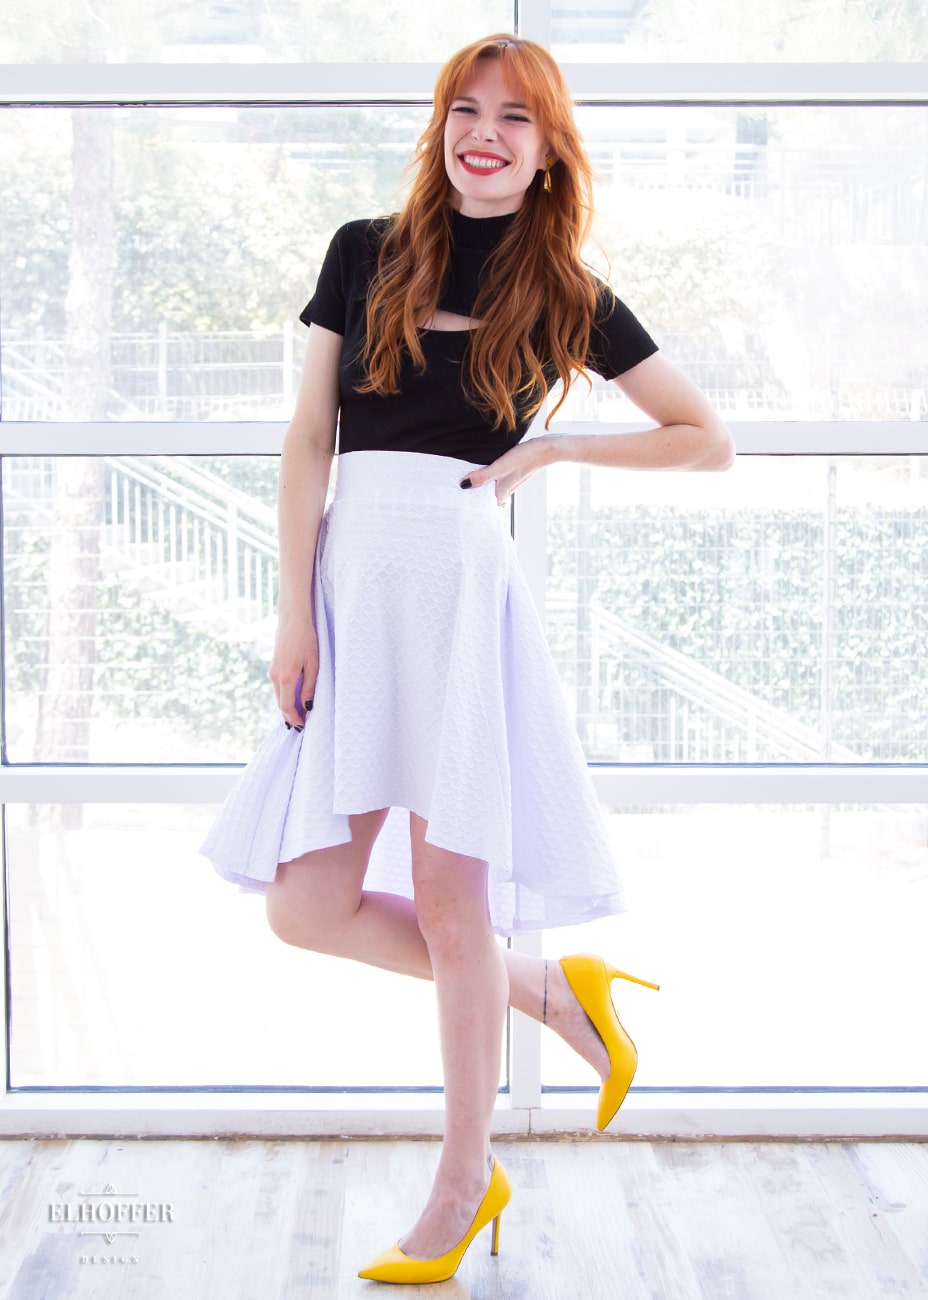 Chloe, a fair skinned XS model with red hair and bangs, is wearing a high low skirt that hits the back of her knees with a two inch elastic covered waistband. The skirt is white with a raised scale texture.